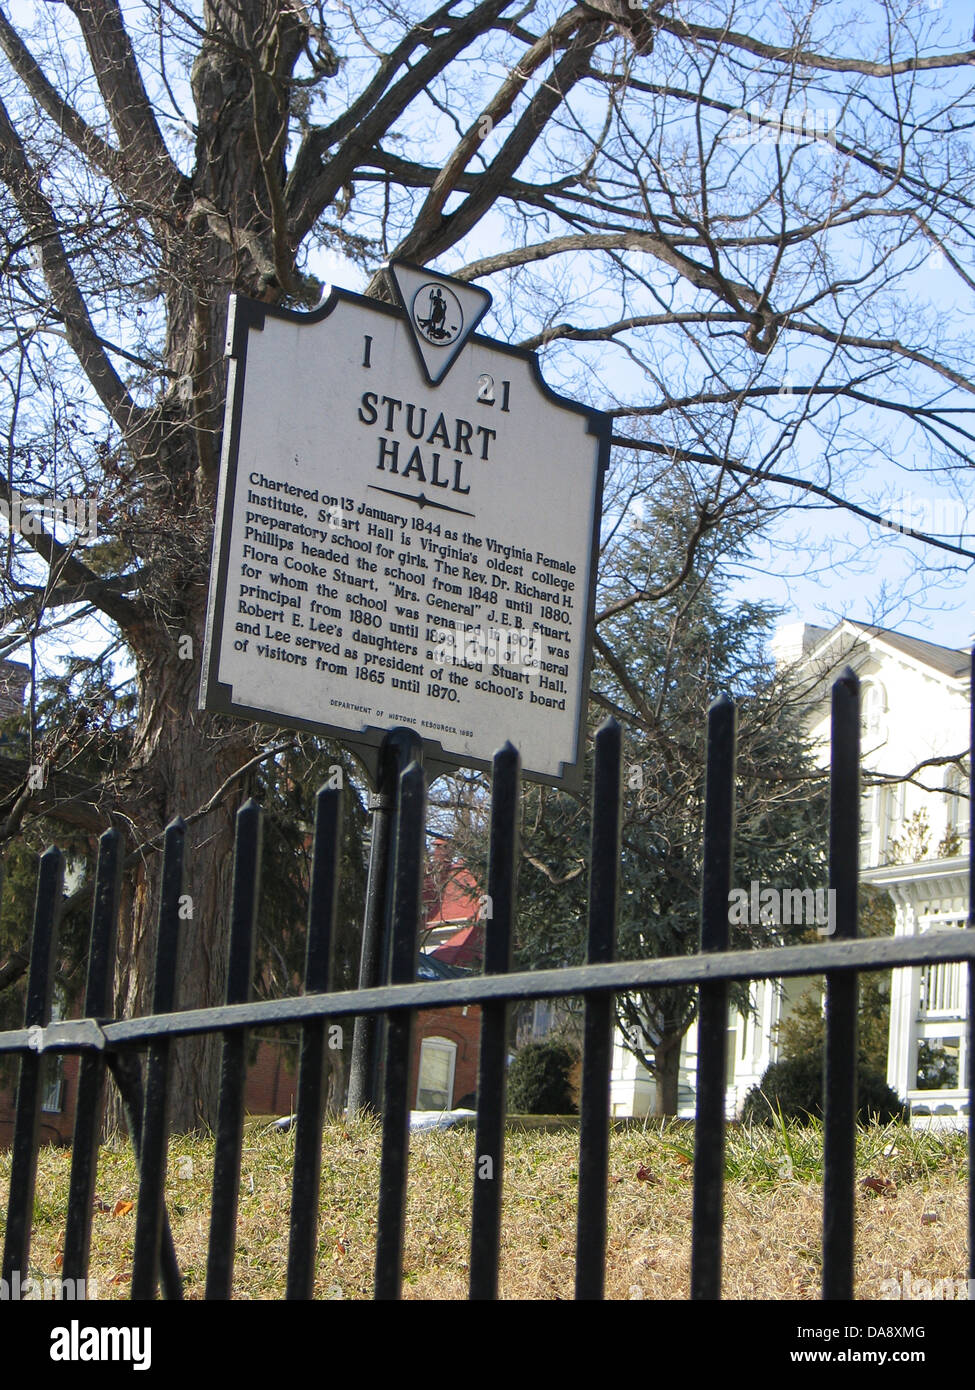 STUART HALL Chartered on 13 January 1844 as the Virginia Female Institute, Stuart Hall is Virginia's oldest college preparatory school for girls. The Rev. Dr. Richard H. Phillips headed the school from 1848 until 1880. Flora Cooke Stuart, 'Mrs. General' J.E.B. Stuart, for whom the school was renamed in 1907, was principal from 1880 until 1899. Two of General Robert E. Lee's daughters attended Stuart Hall, and Lee served as president of the school's board of visitors from 1865 until 1870. Department of Historic Resources, 1993 Stock Photo